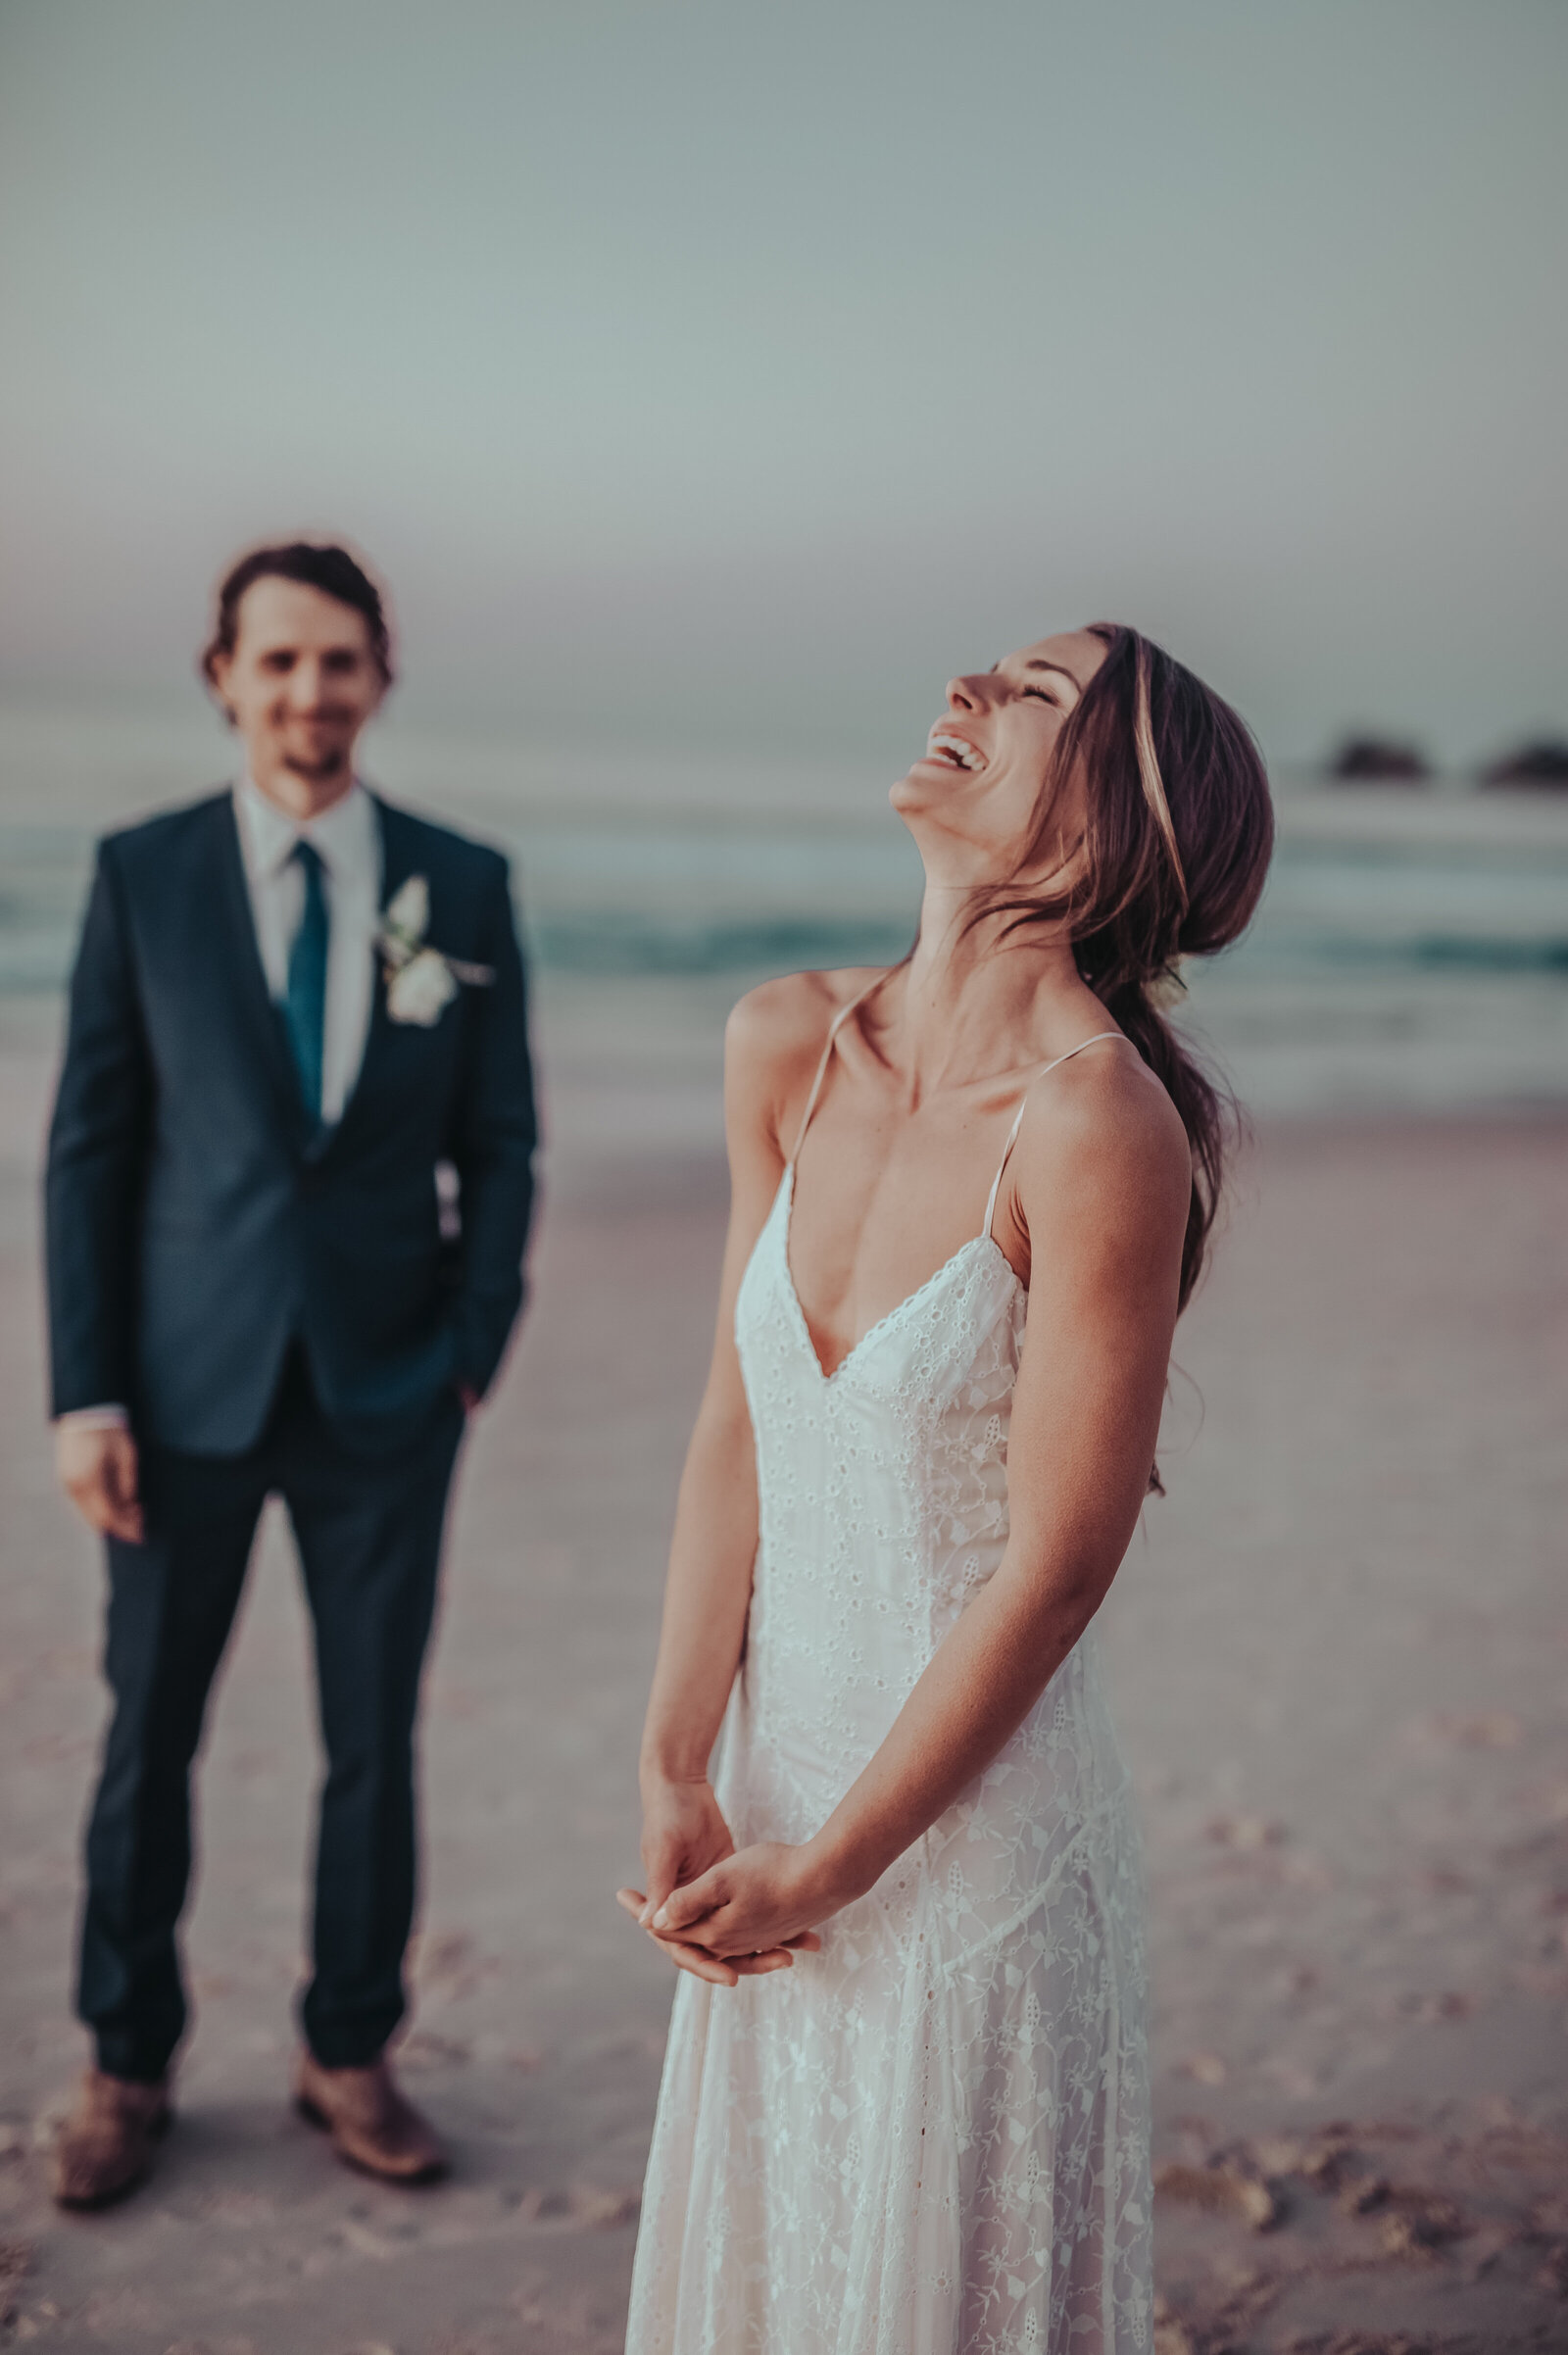 Casual and romantic beach wedding photoshoot with bride and groom